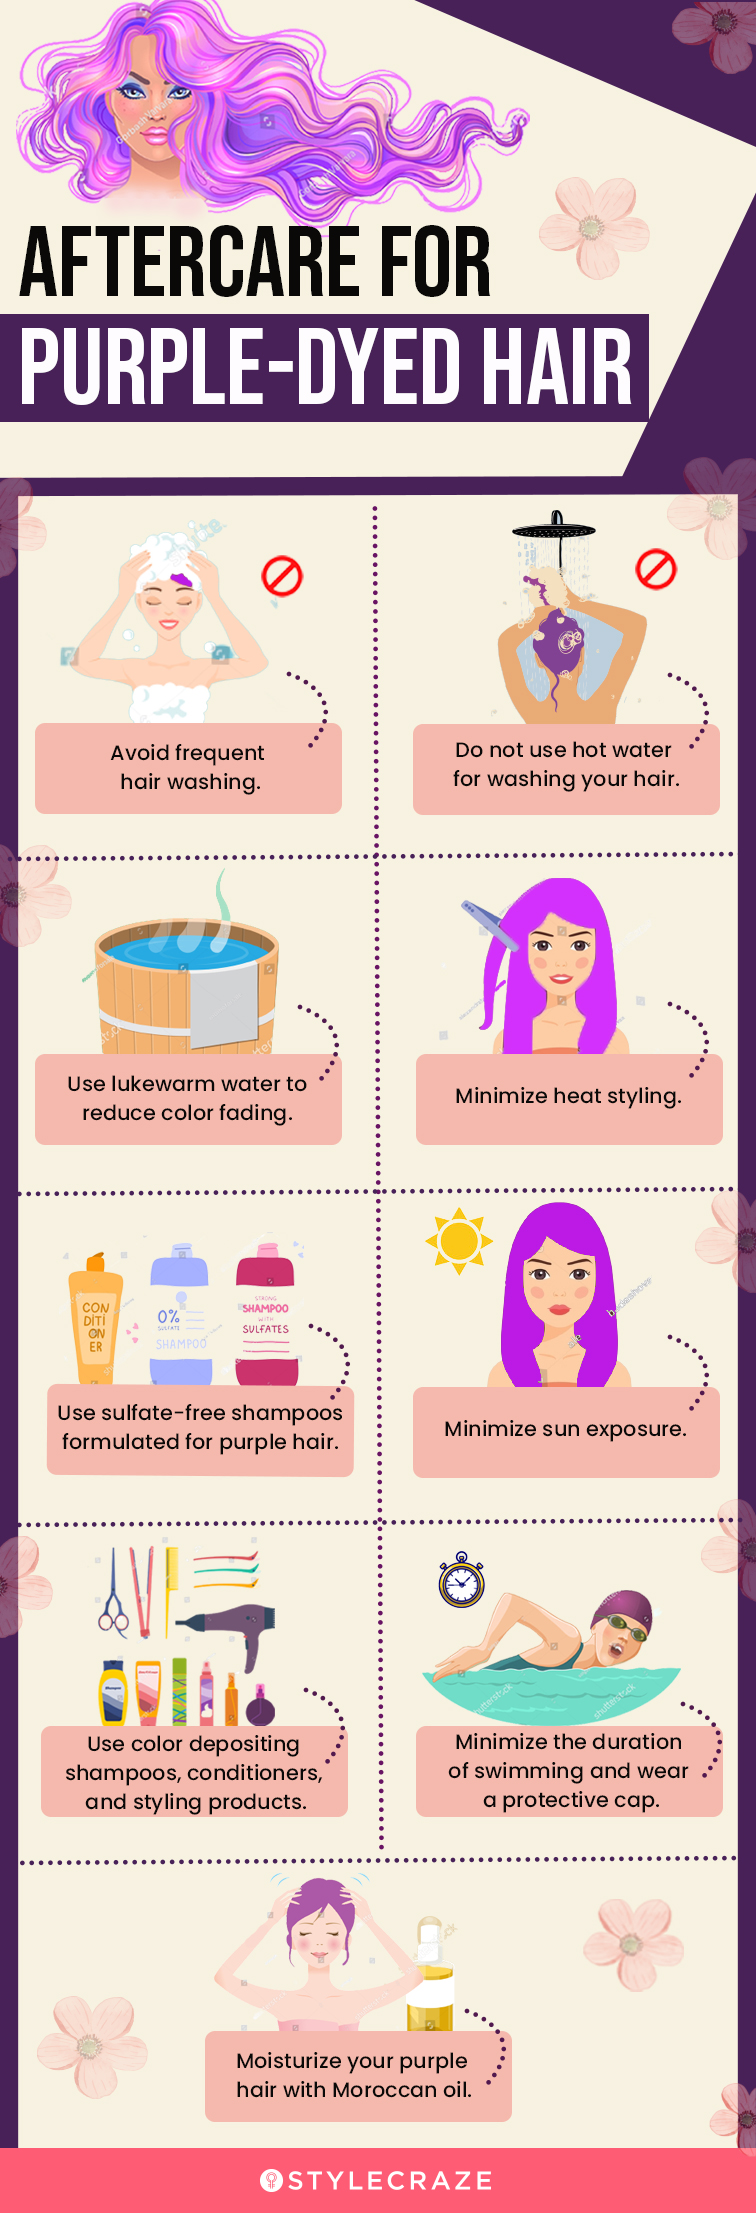 aftercare for purple-dyed hair (infographic)